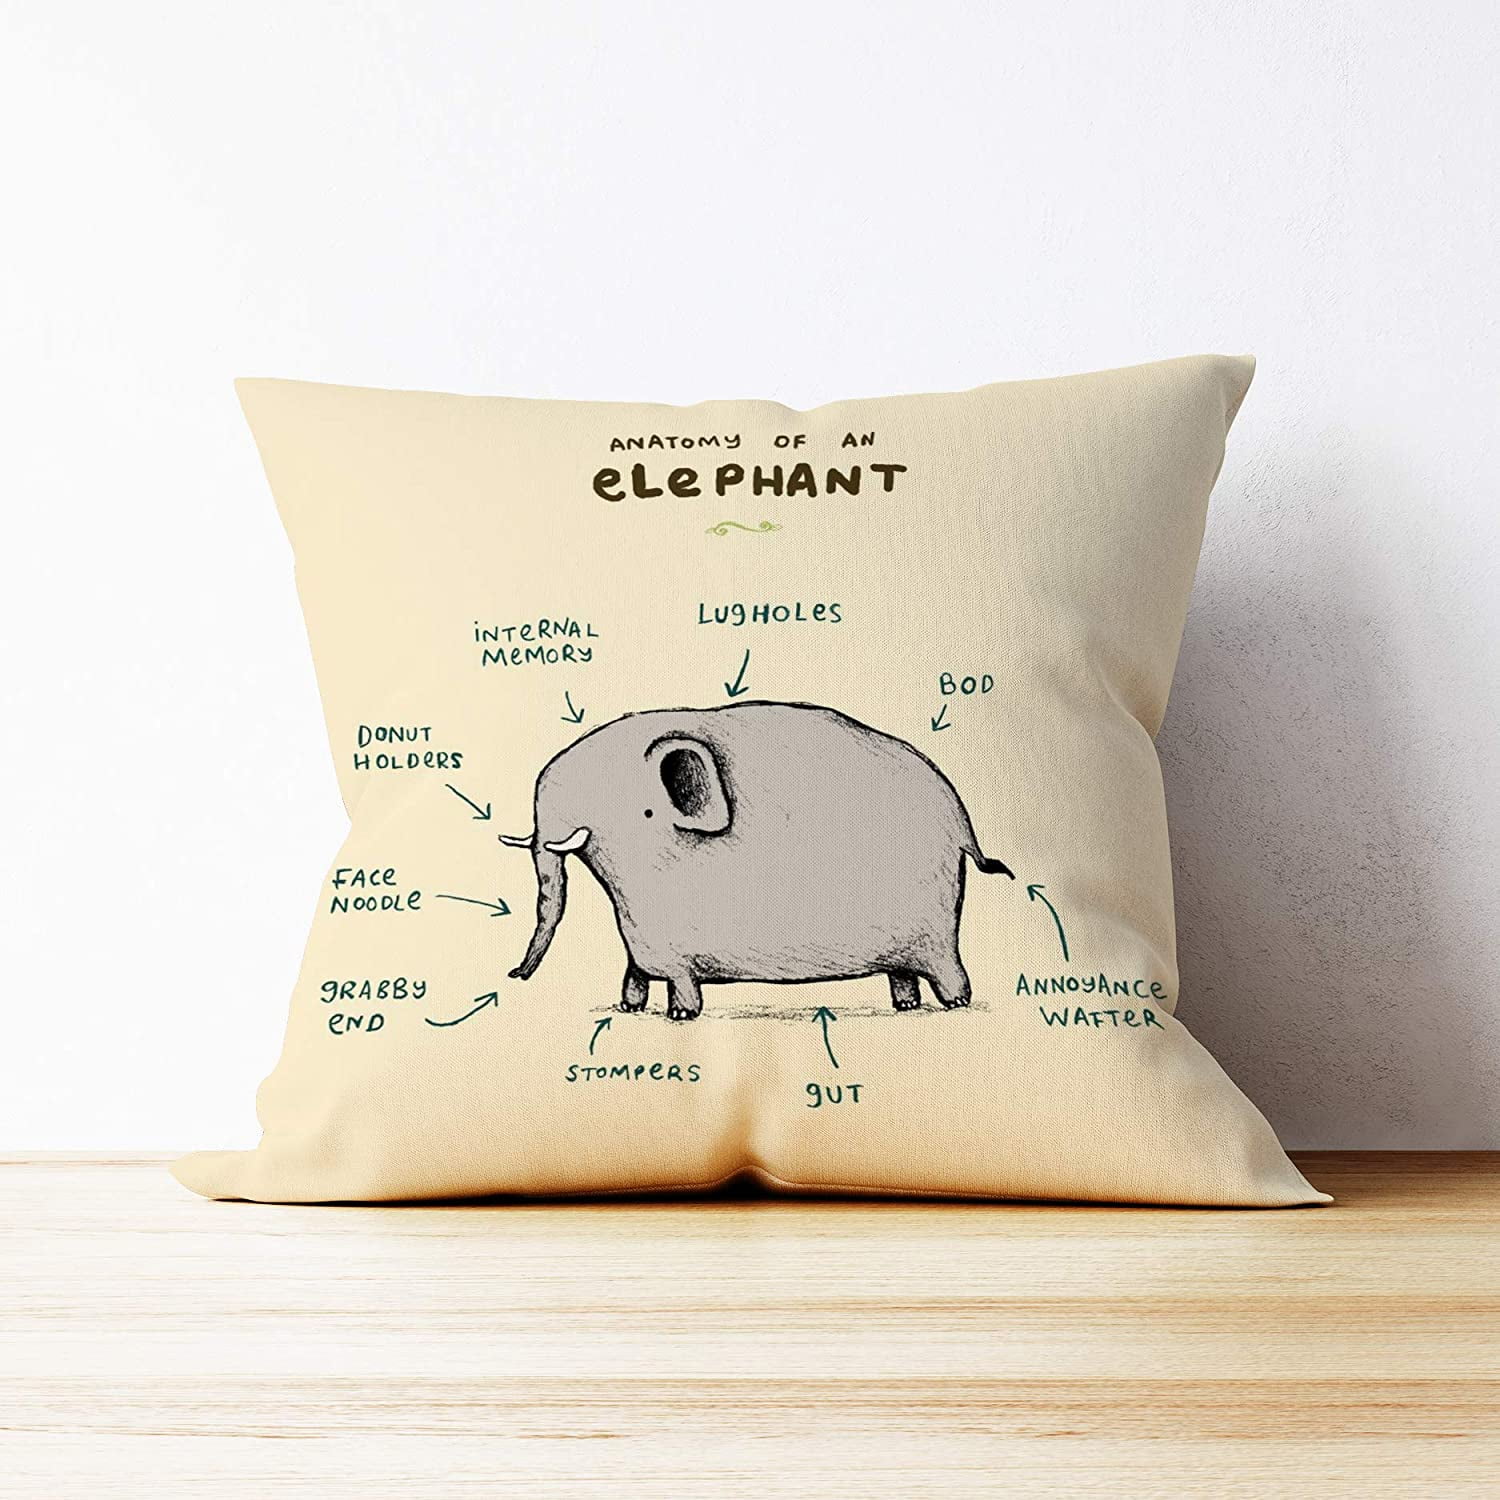 Funny Elephant Anatomy Map Throw Pillow Case Gifts Daughter Funny Elephant Decor Son Child Room Decor Elephant Lover Gifts 18 x 18 Inch Linen Cushion Cover for Sofa Couch Bed Nursery Decor